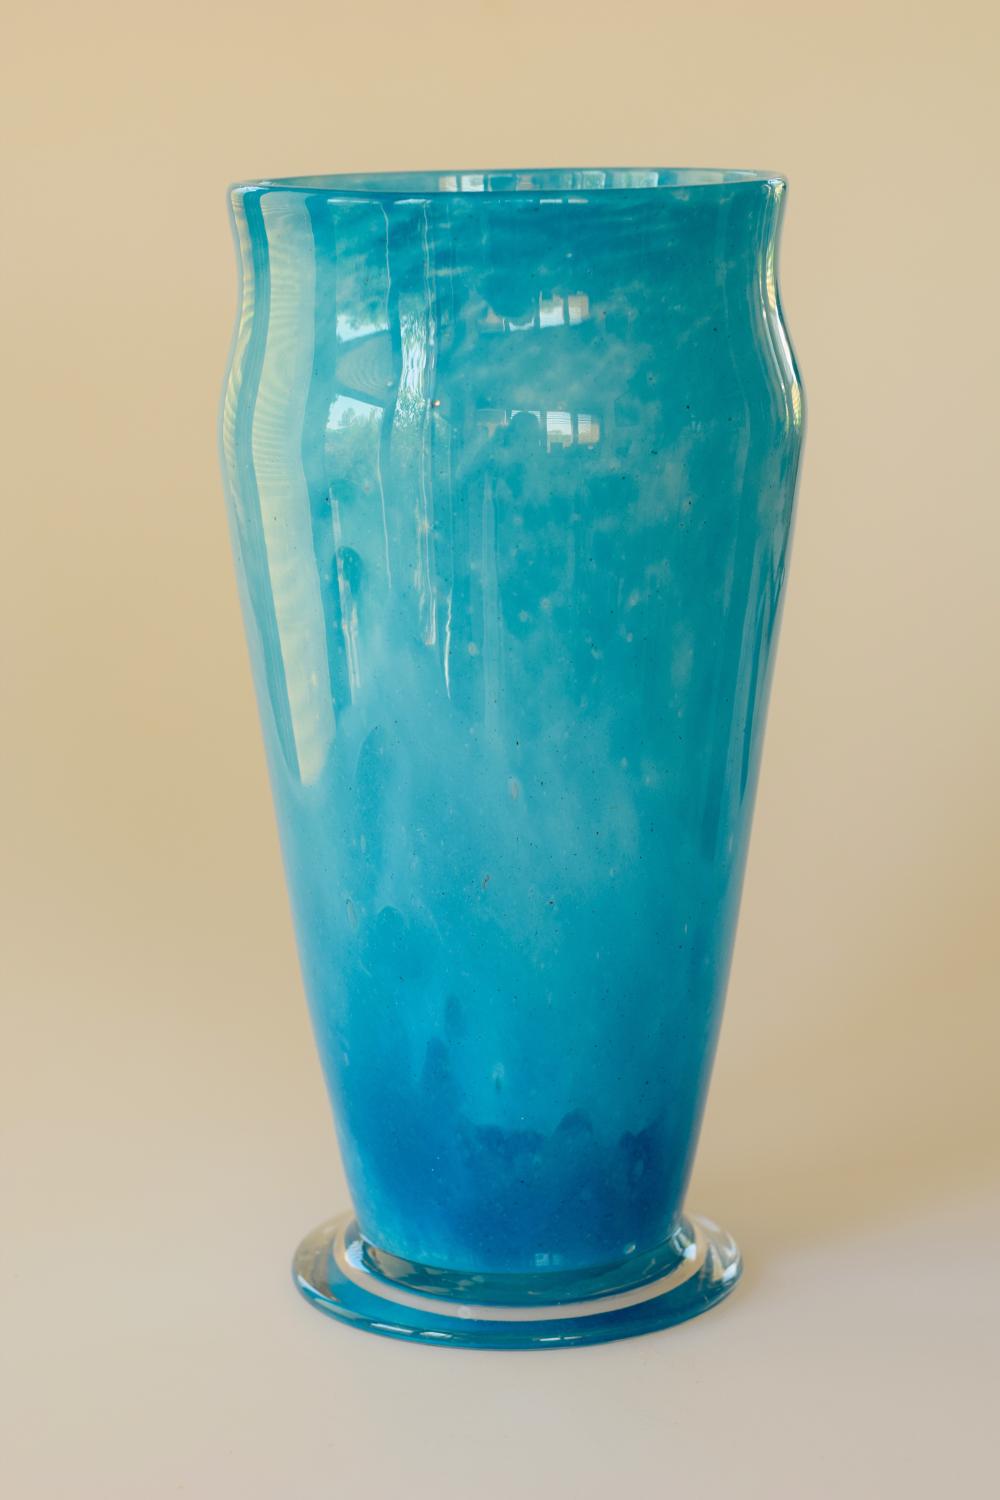 Cloudy blue vase by Harry Powell.